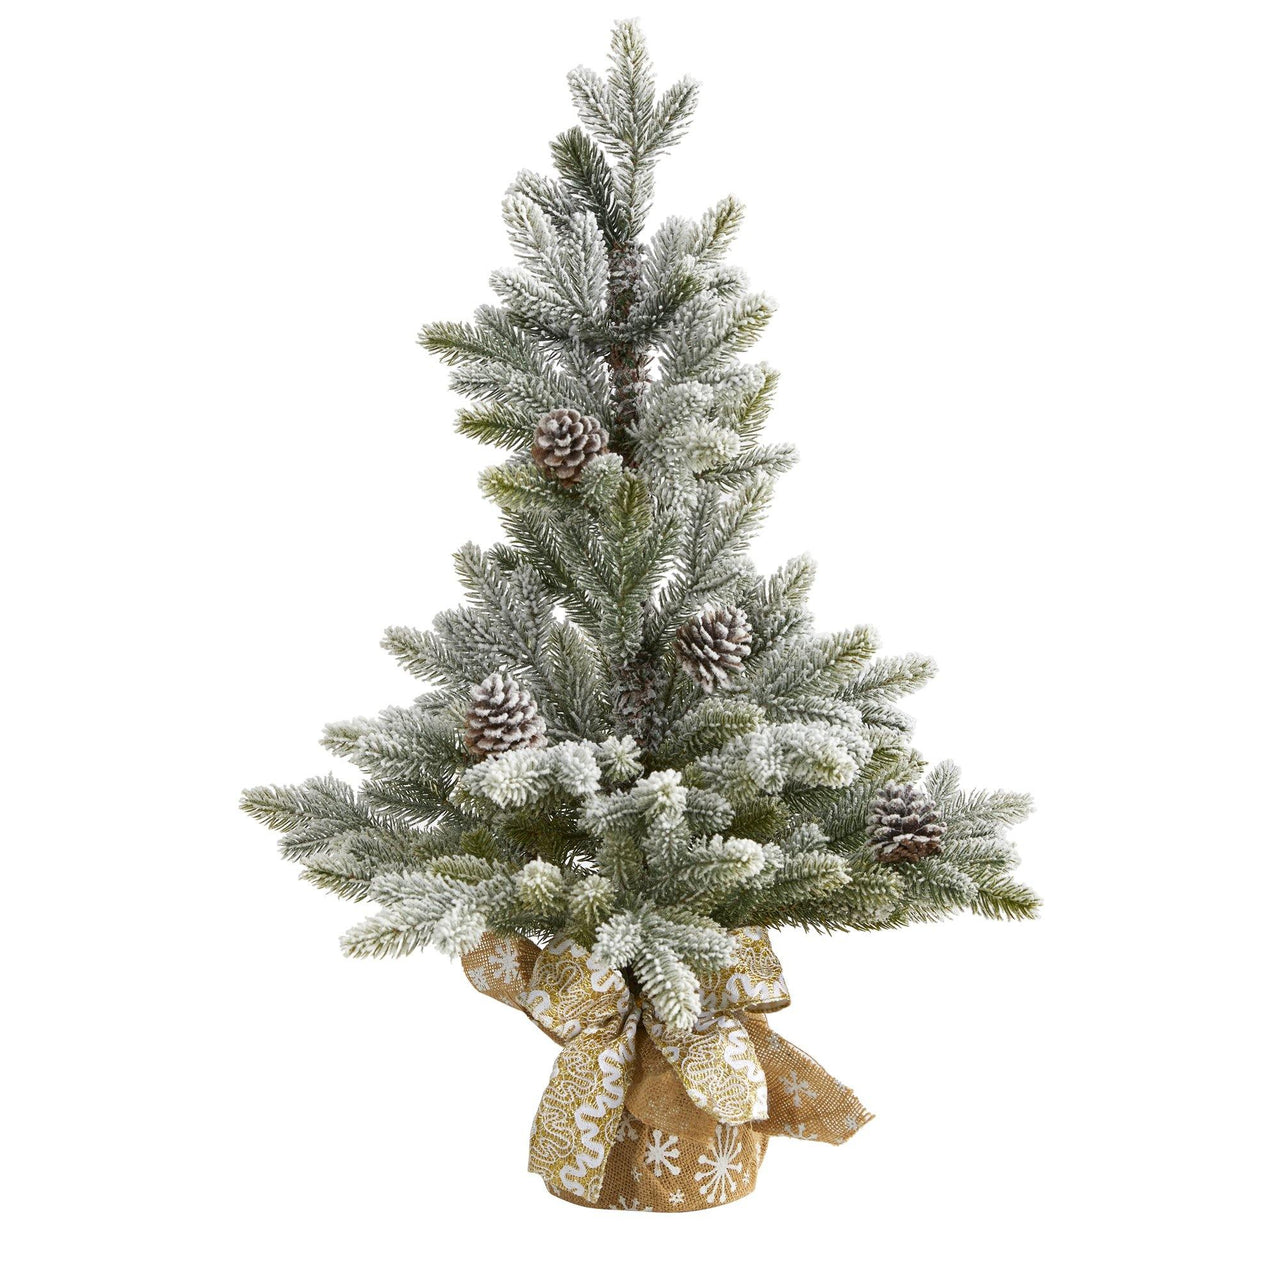 28” Flocked Artificial Christmas Tree with Pine Cones